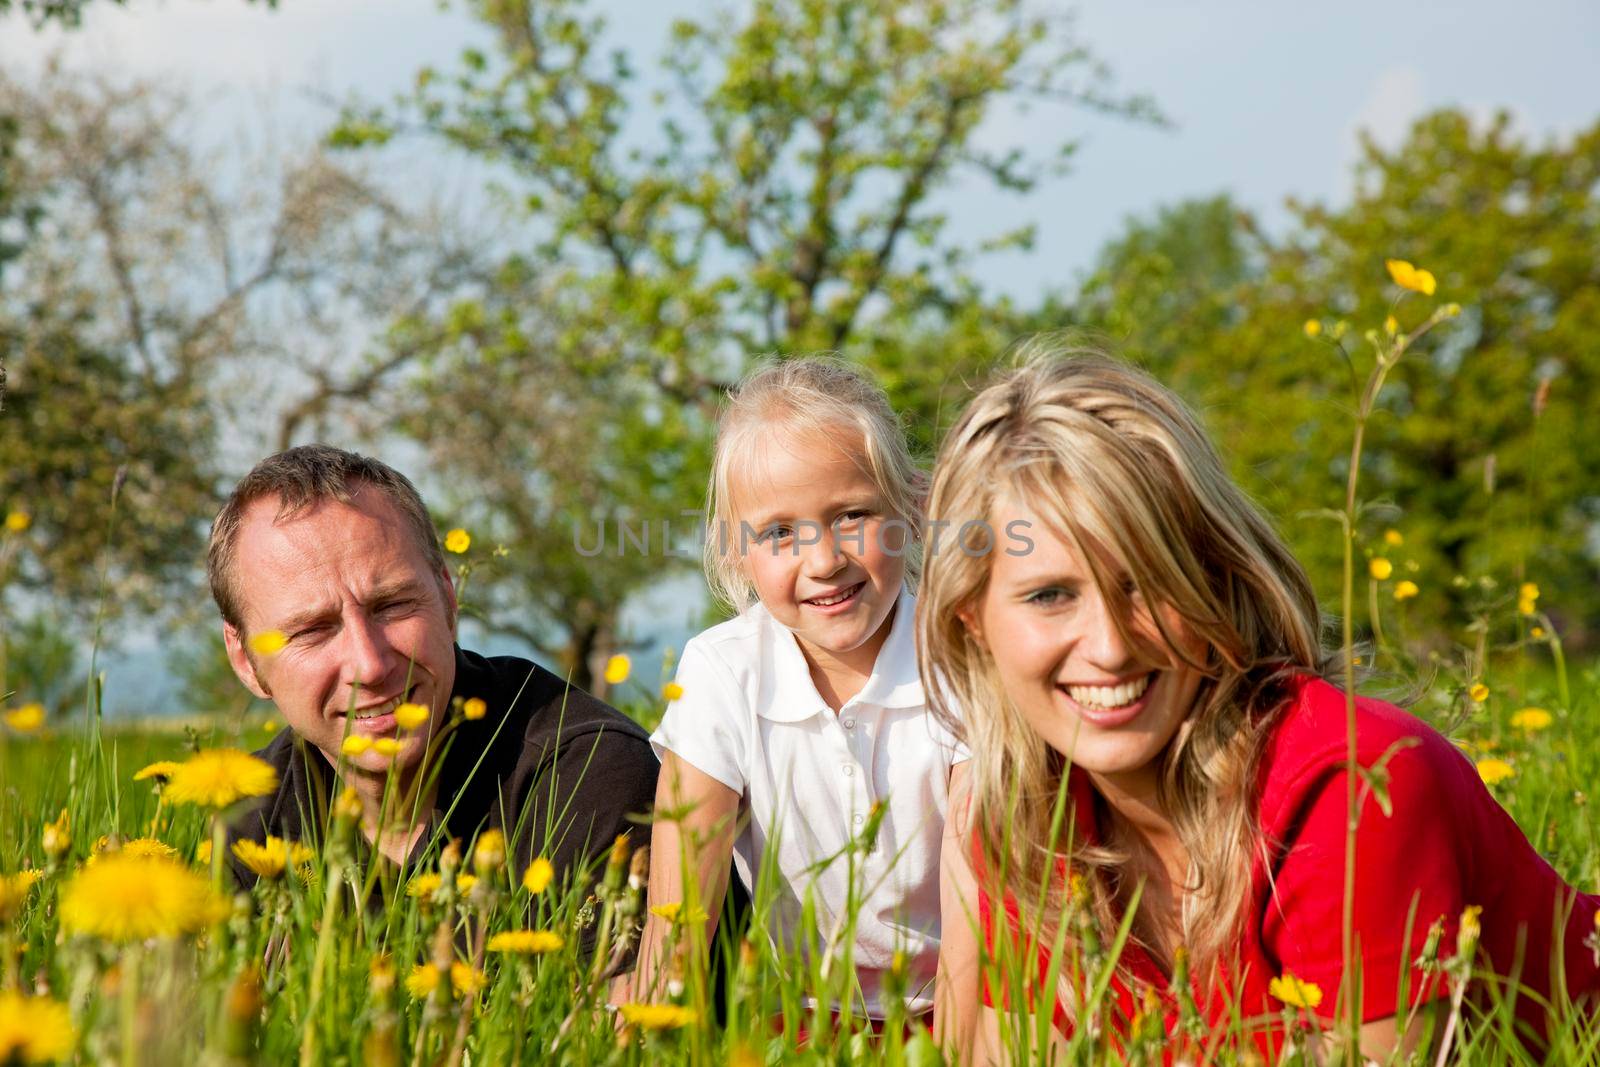 Happy family sitting in a meadow full of dandelions in spring (selective focus on girl)